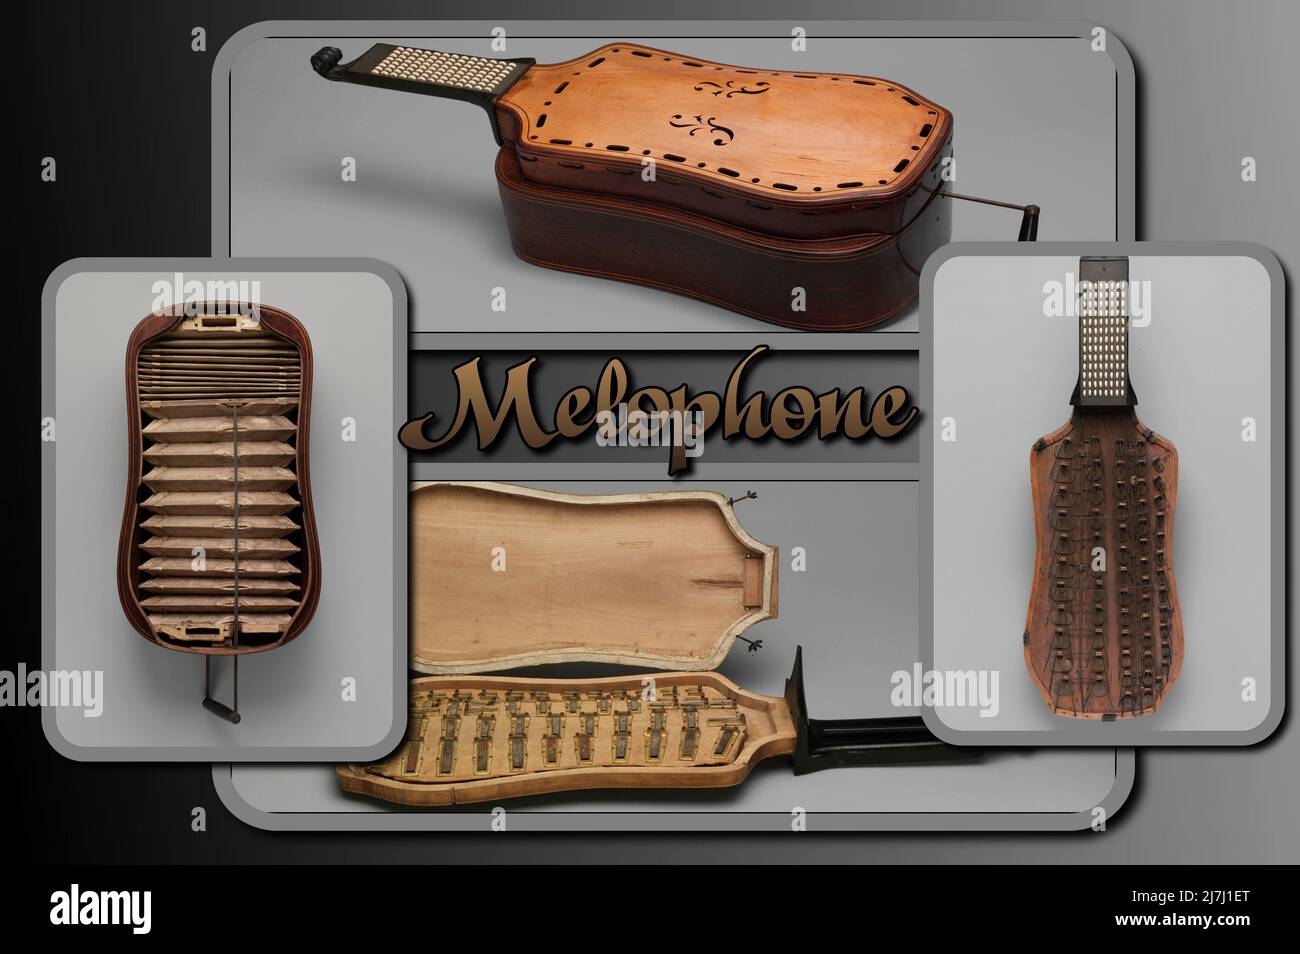 The melophone is a free-reed instrument related to accordions, concertinas, reed organs, and harmonicas. Stock Photo